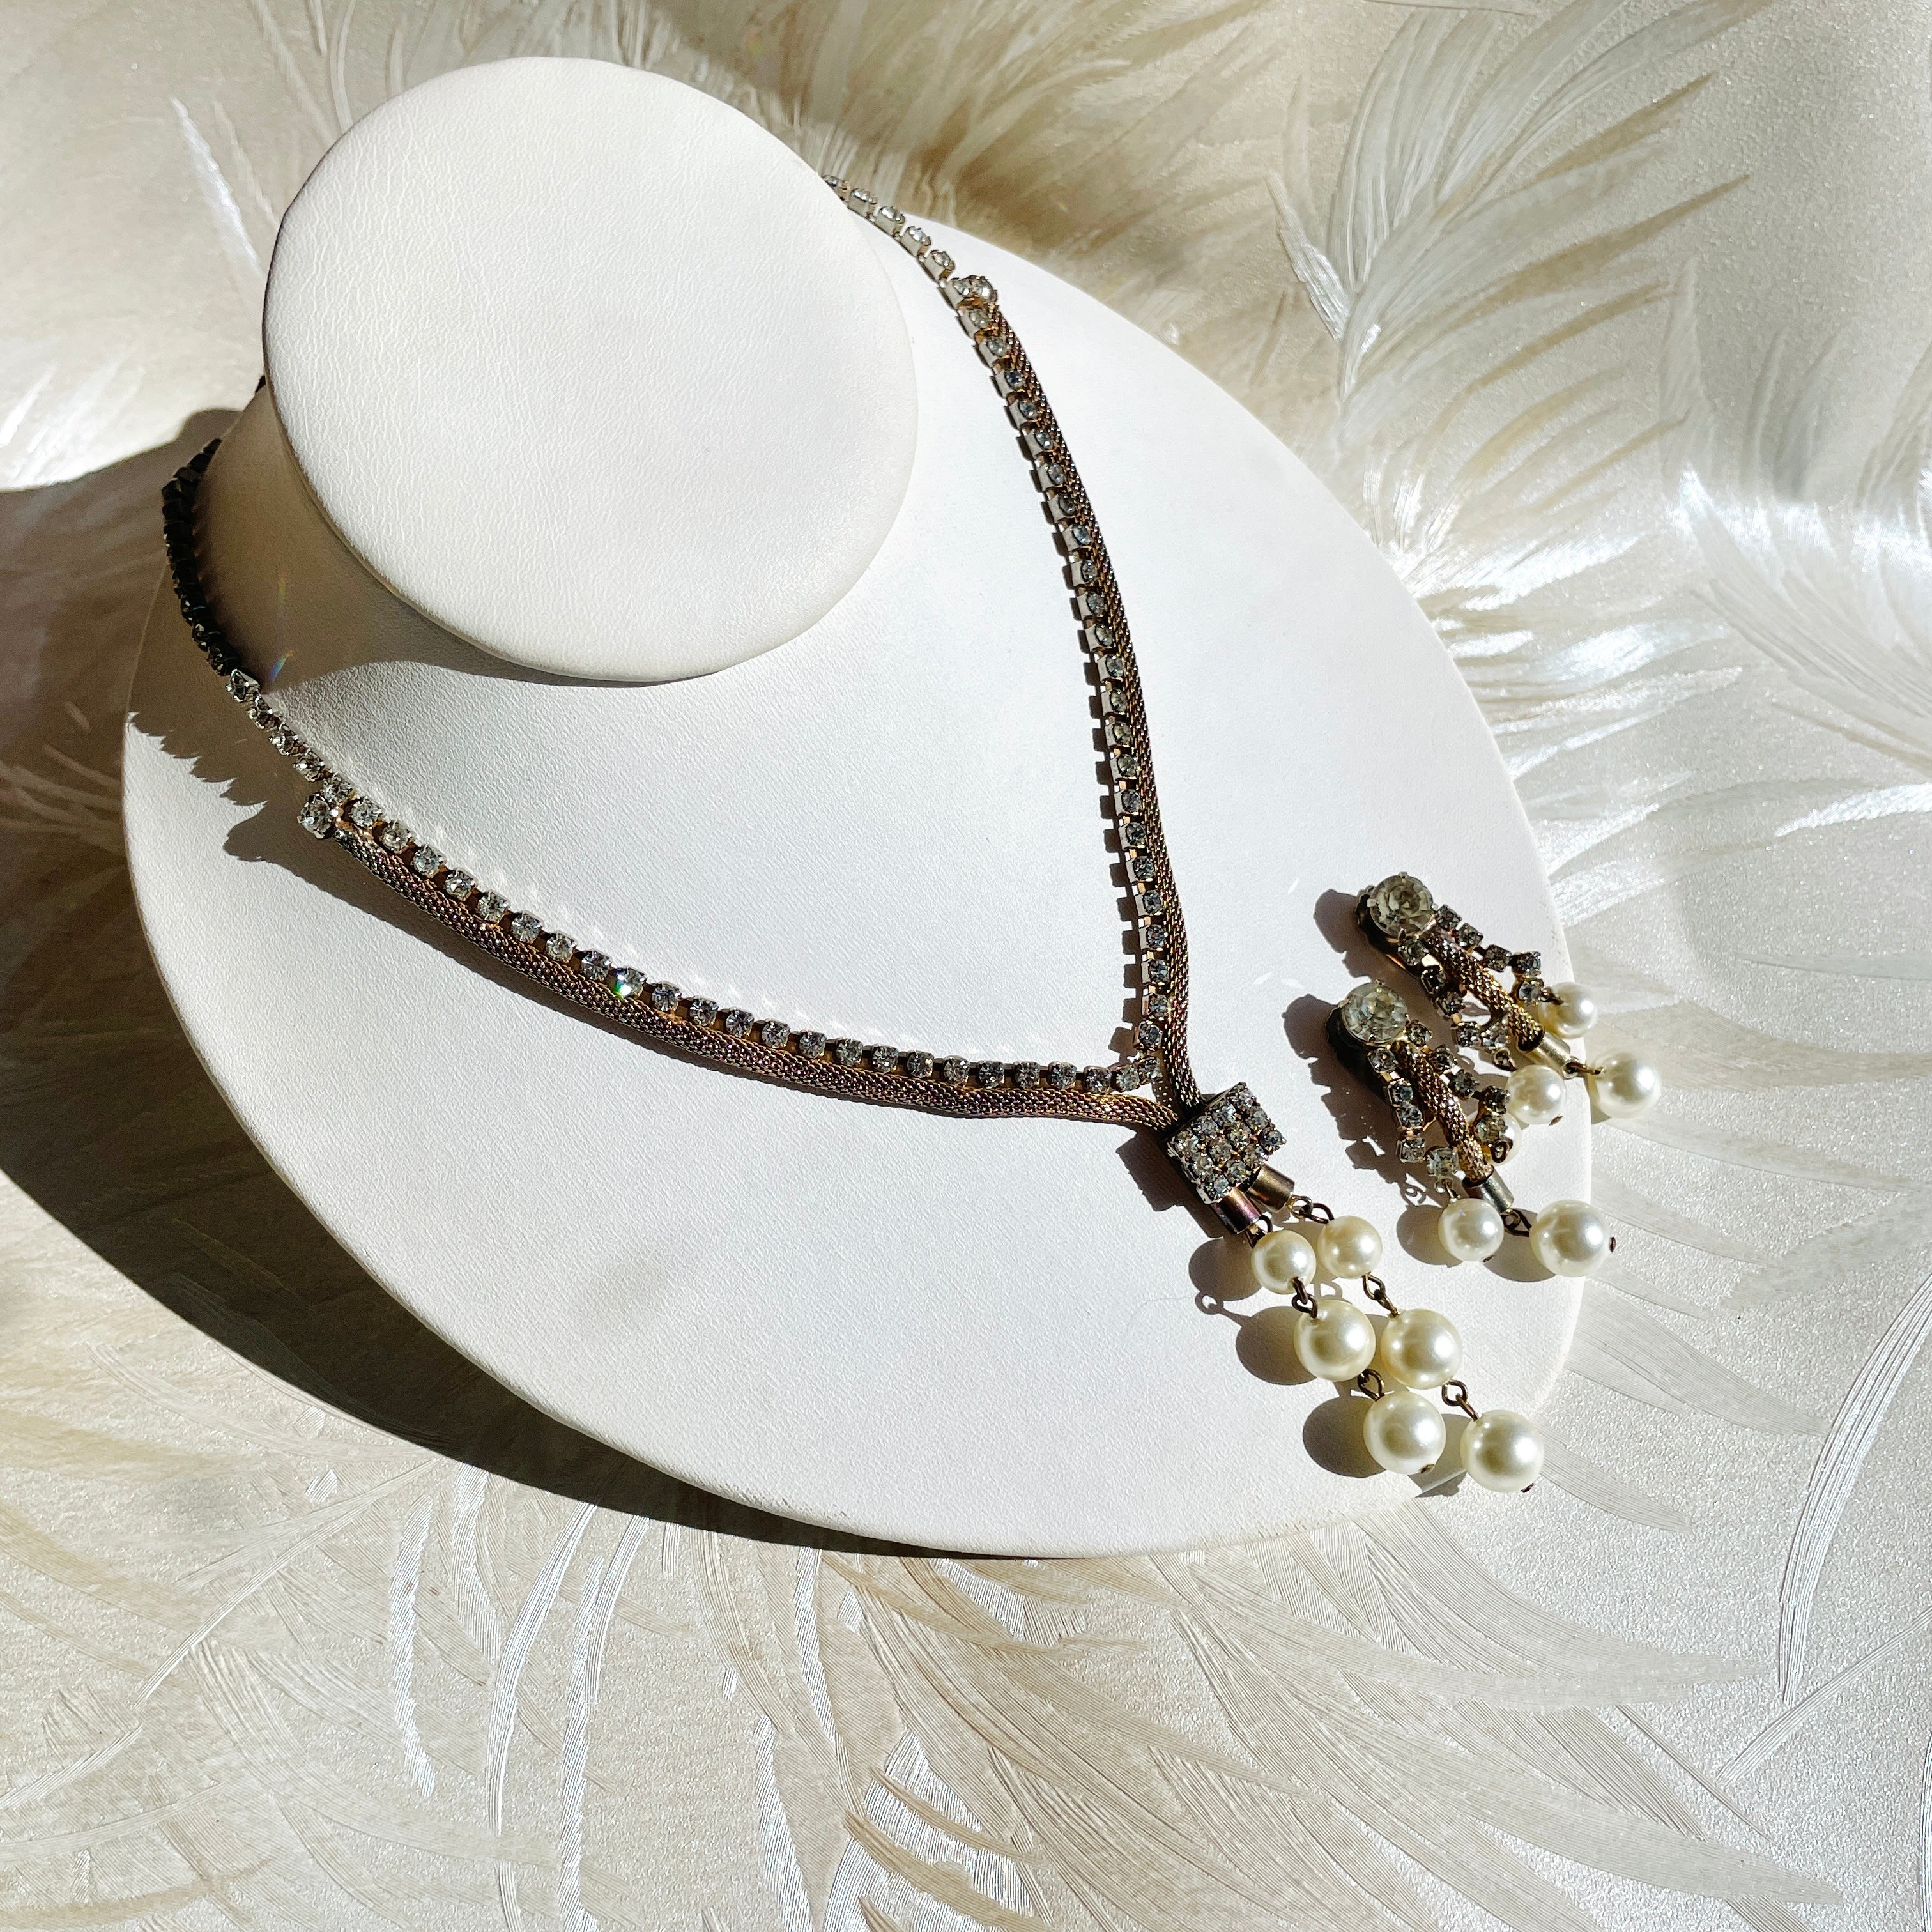 Rhinestone Mesh and Pearl Necklace + Earring Set